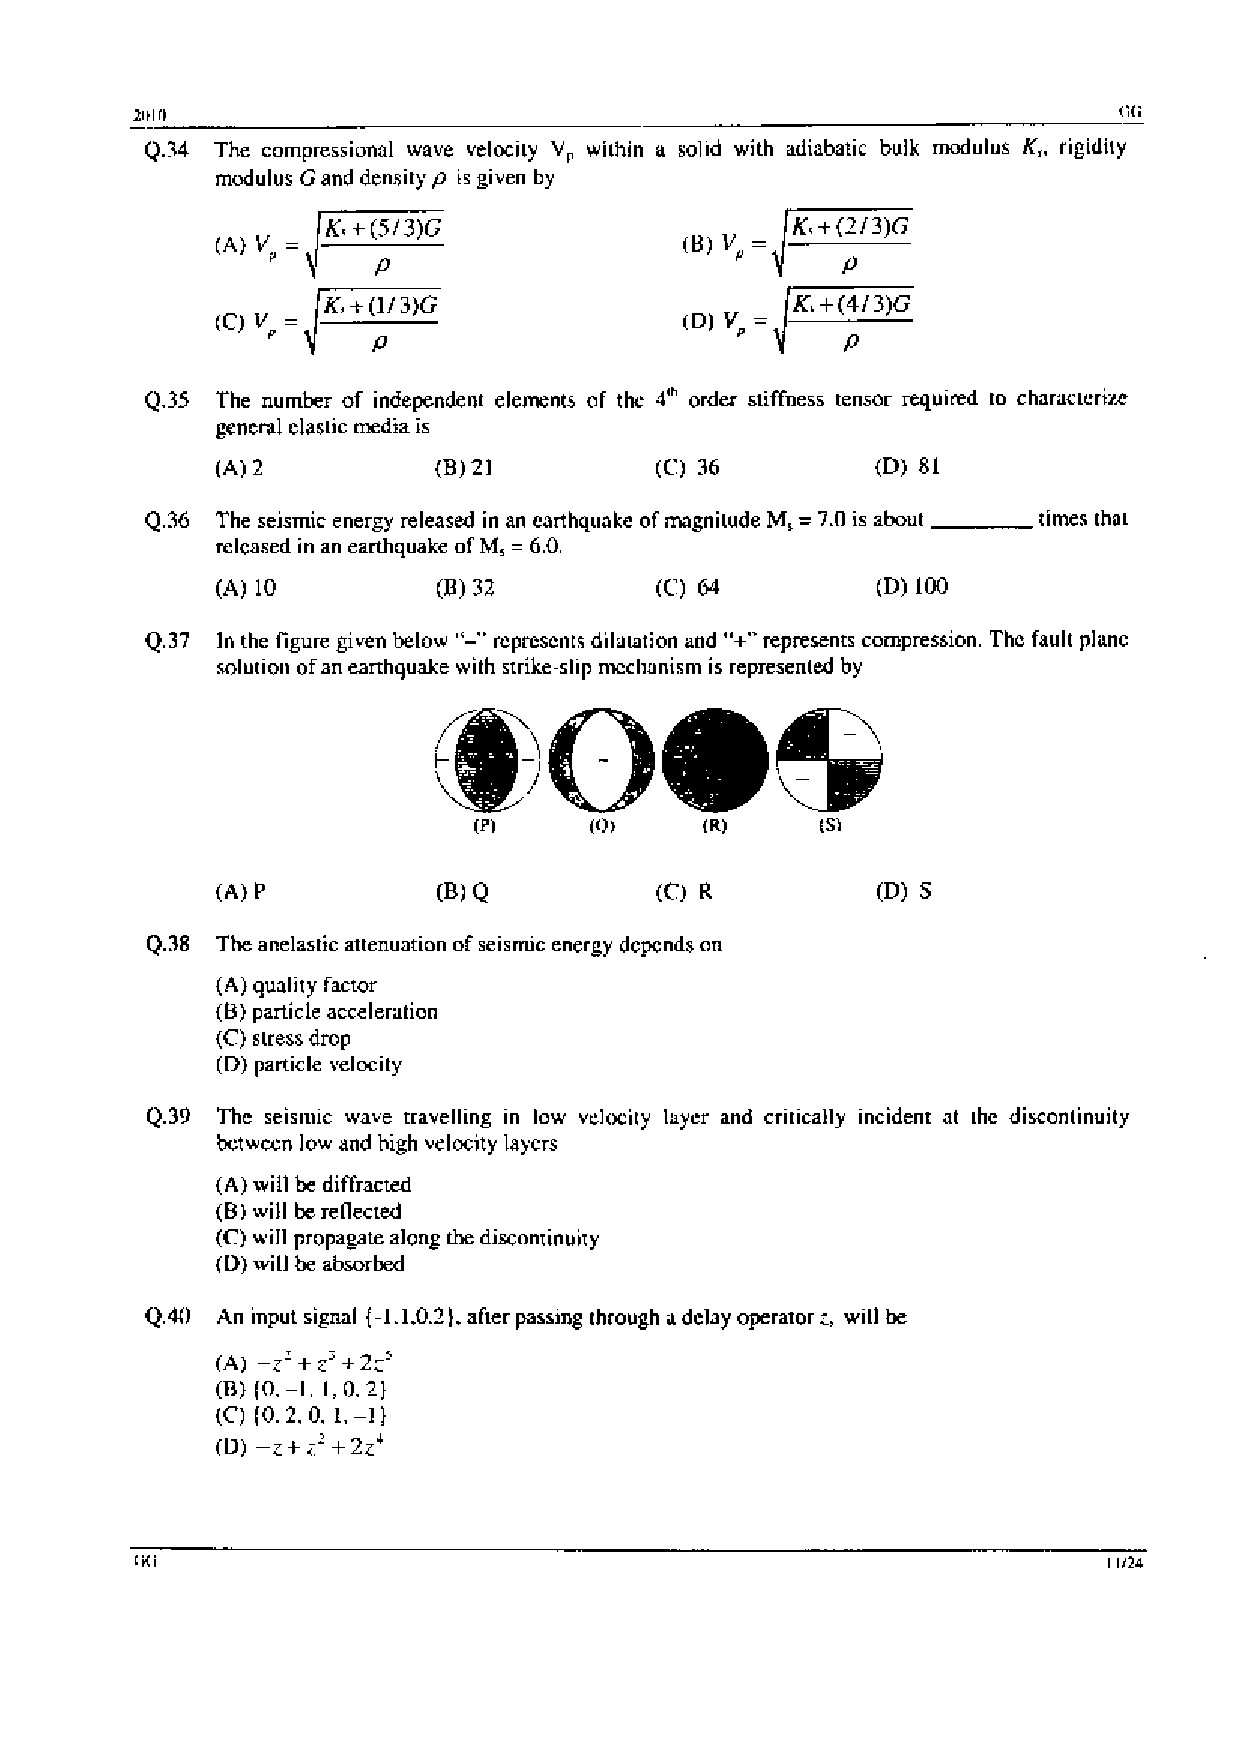 GATE Exam Question Paper 2010 Geology and Geophysics 11